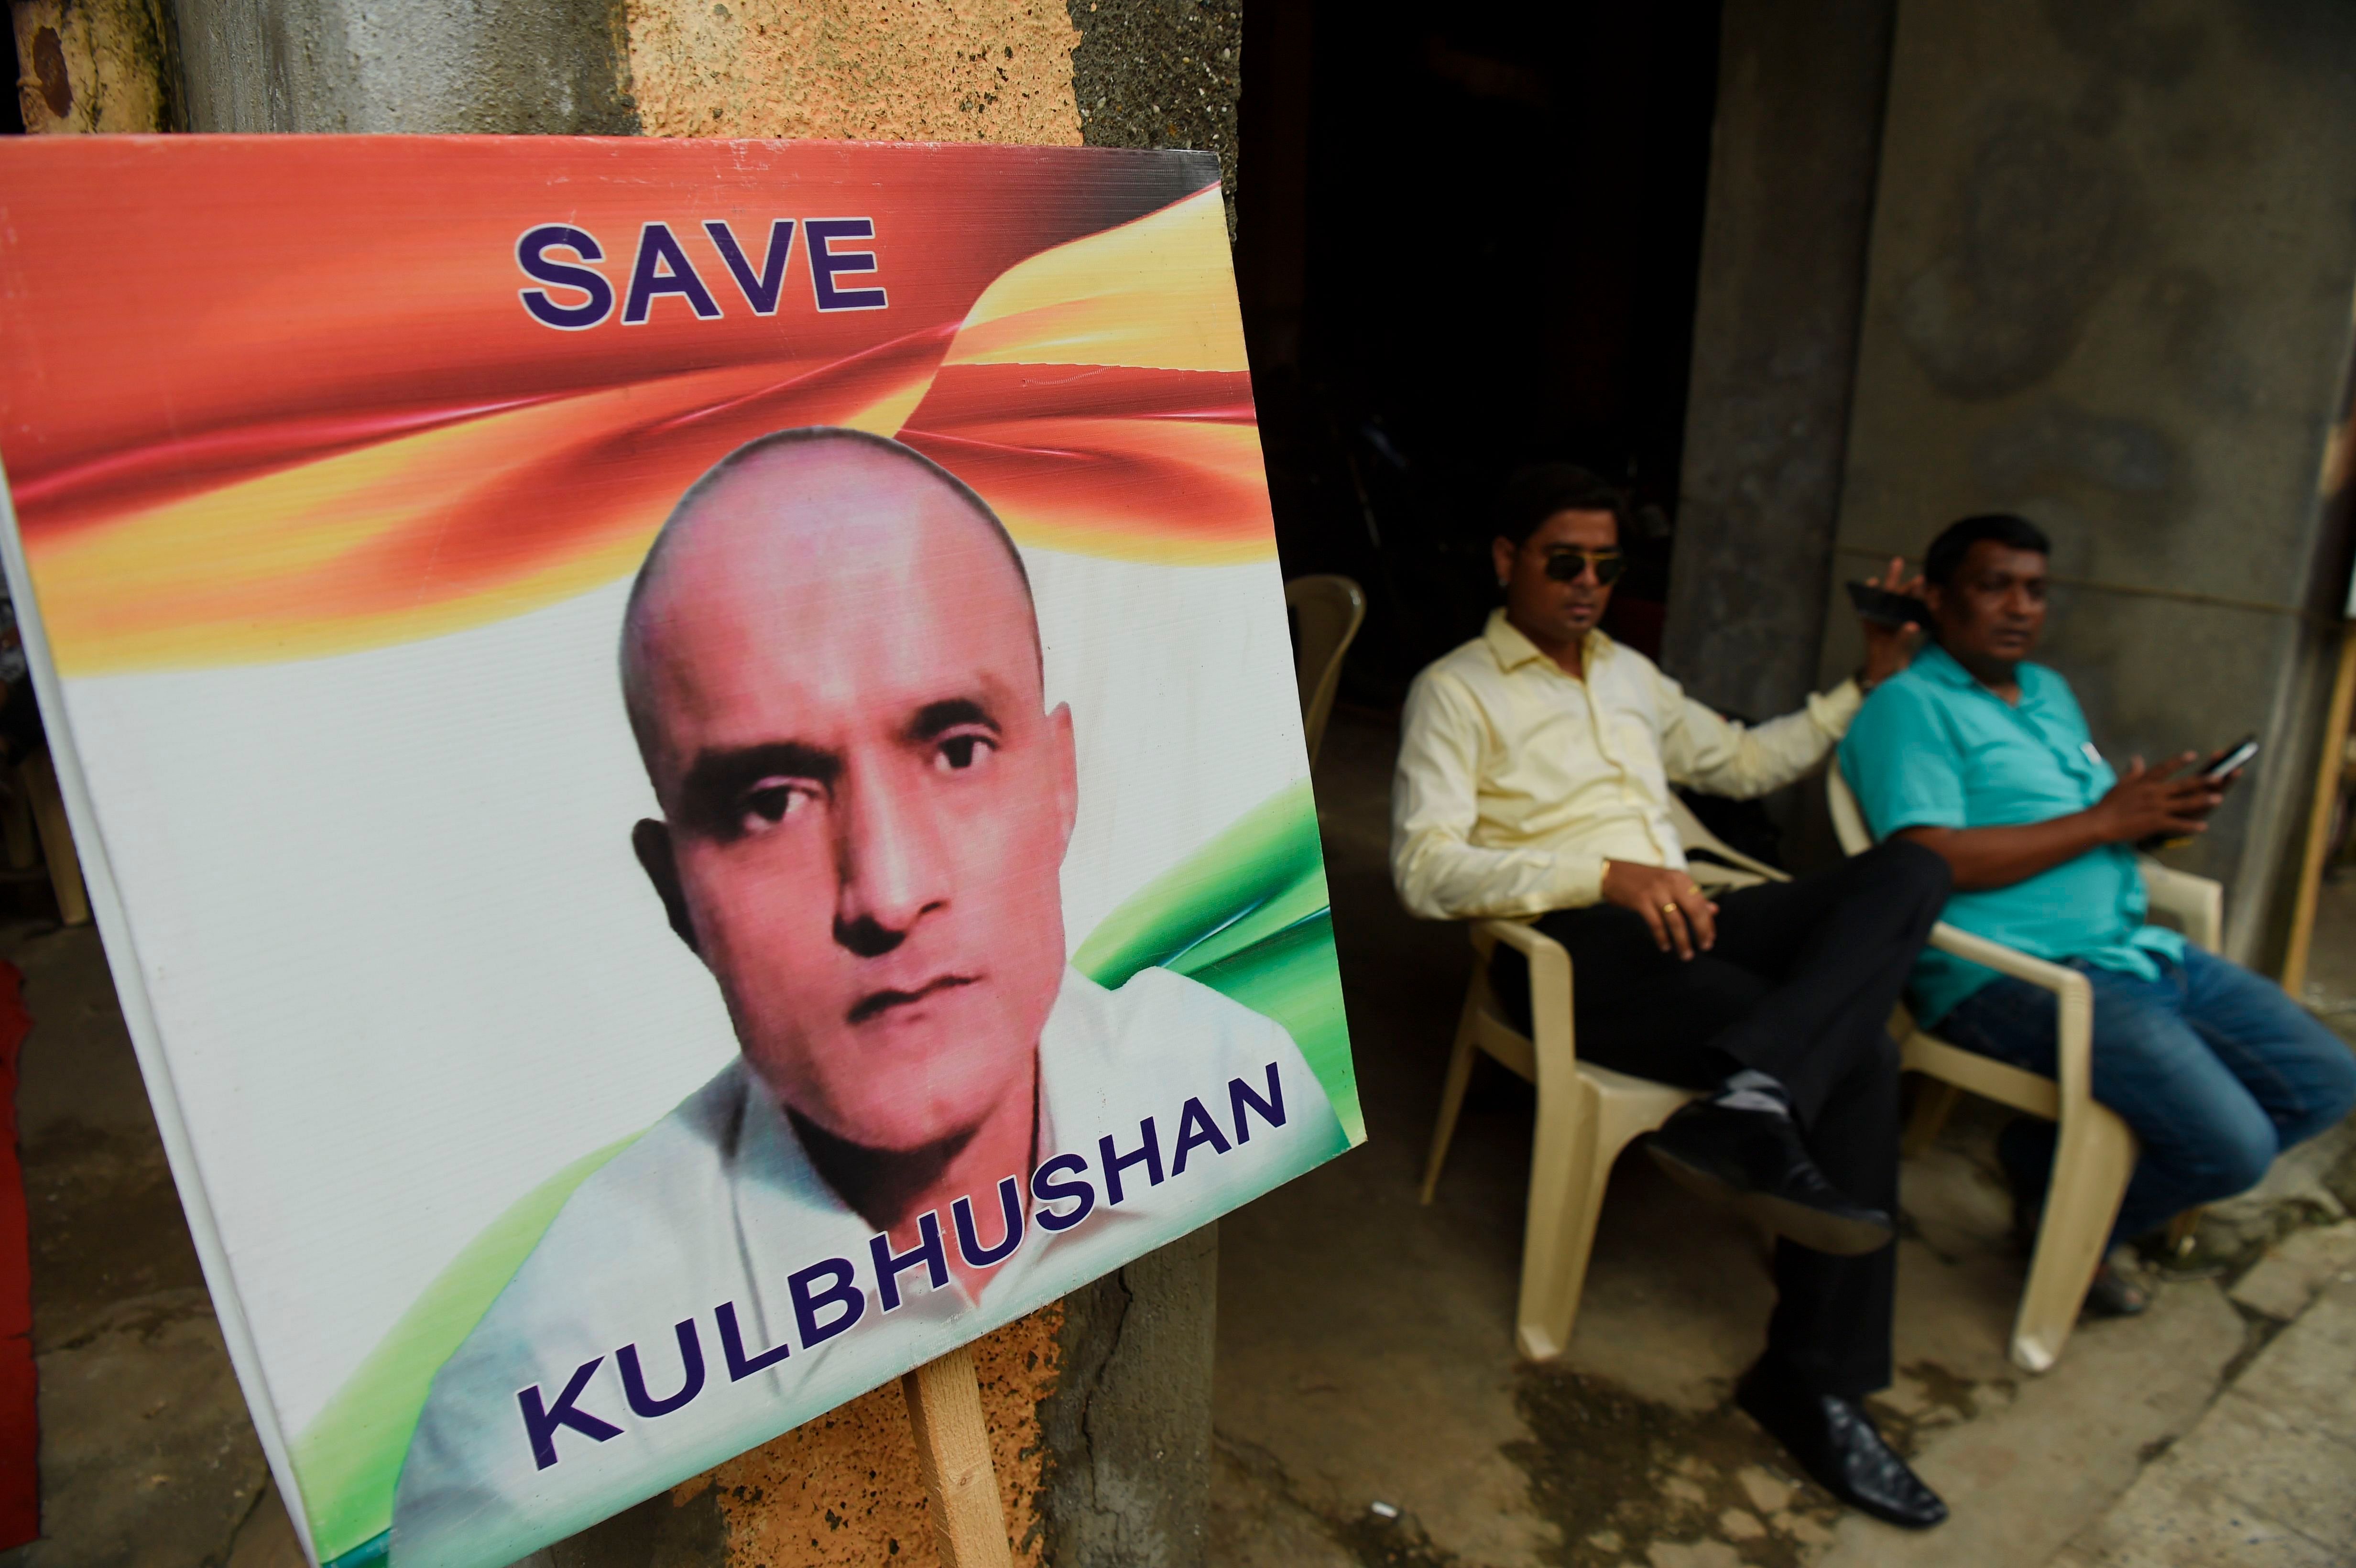 Kulbhushan Jadhav's sentence "had not been forgiven" through the ordinance which, he said, has effectively stopped India from going to the UN Security Council against Pakistan. Credit: AFP File Photo